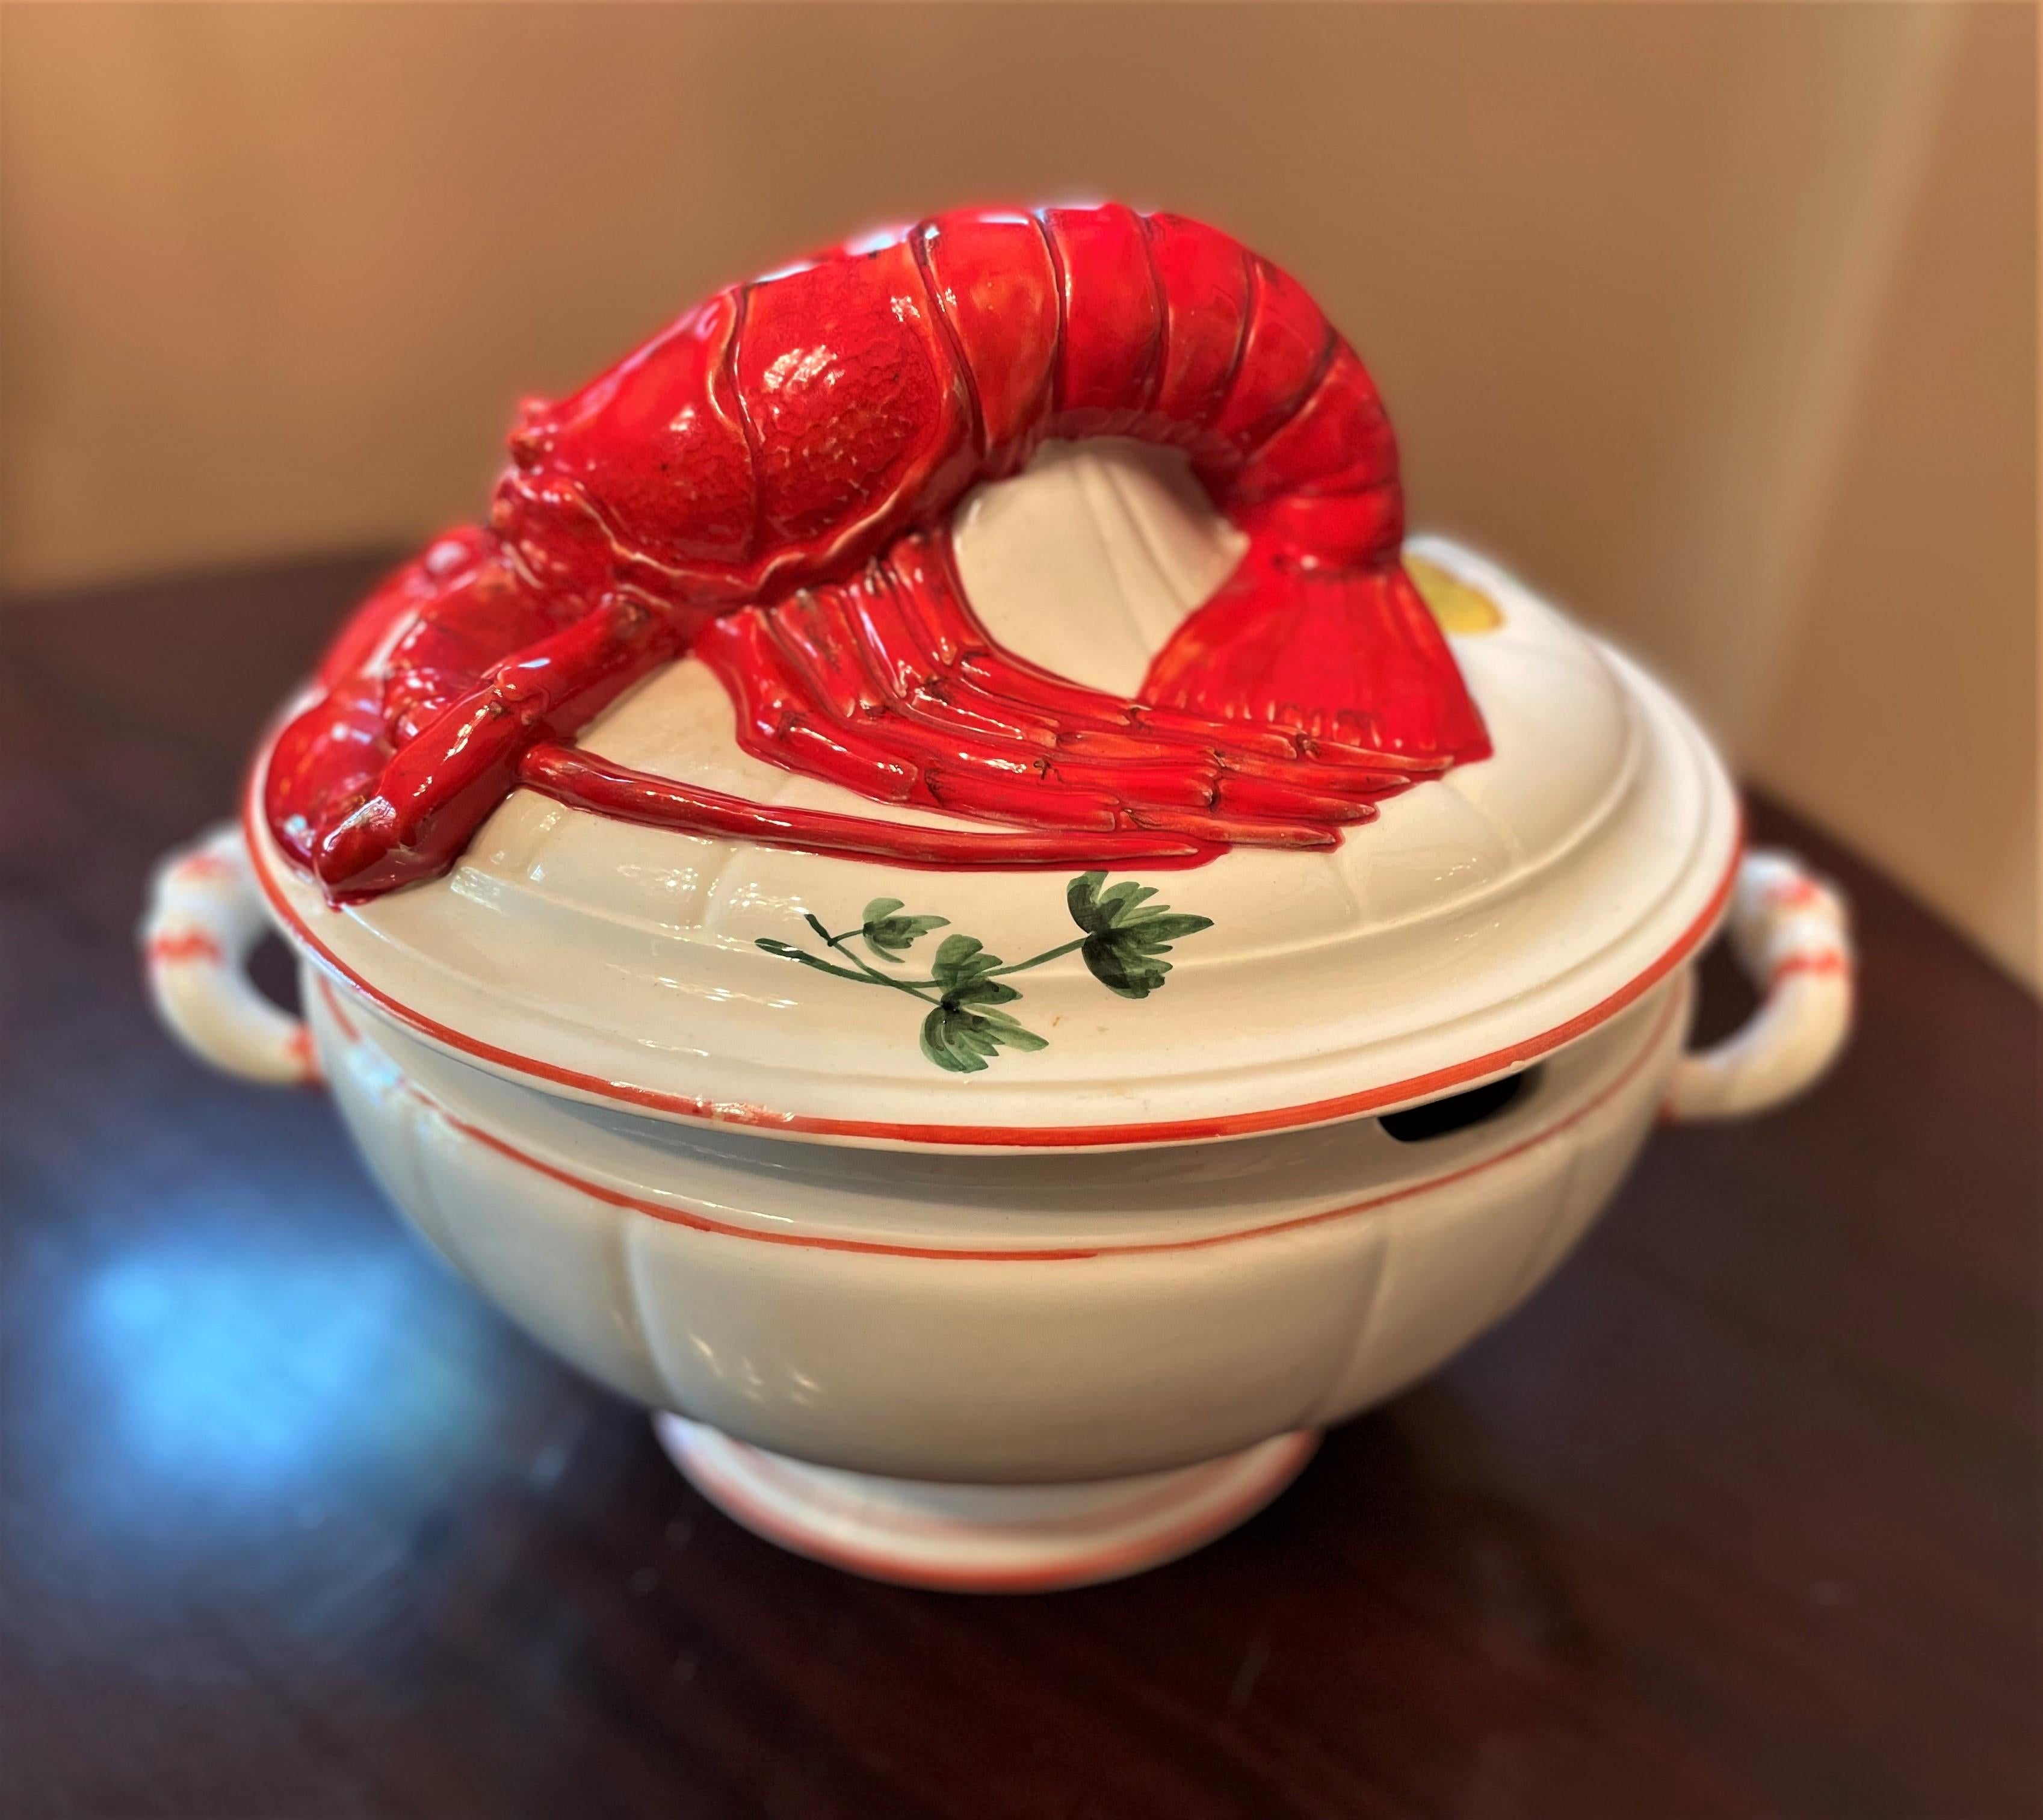 A rare one-of-a-kind find! This lobster-topped soup tureen makes me smile. I'm ready to drop everything and gather my family and friends for a hearty dinner al fresco.

This is an artisanal piece for sure -- hand-glazed ceramic from Italy and